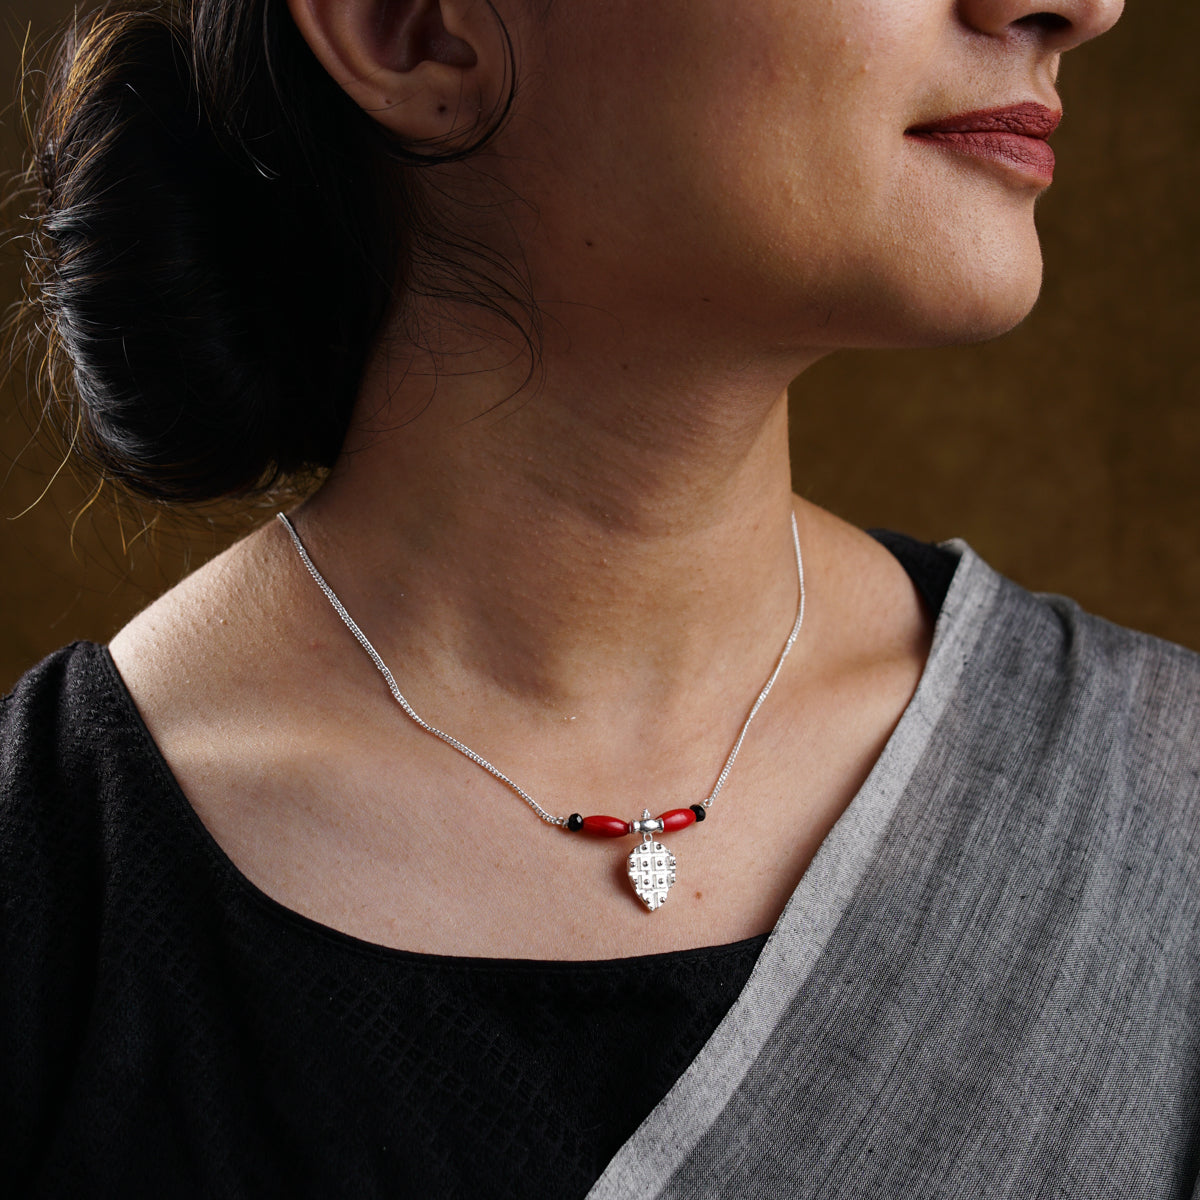 a woman wearing a necklace with a red and white bead